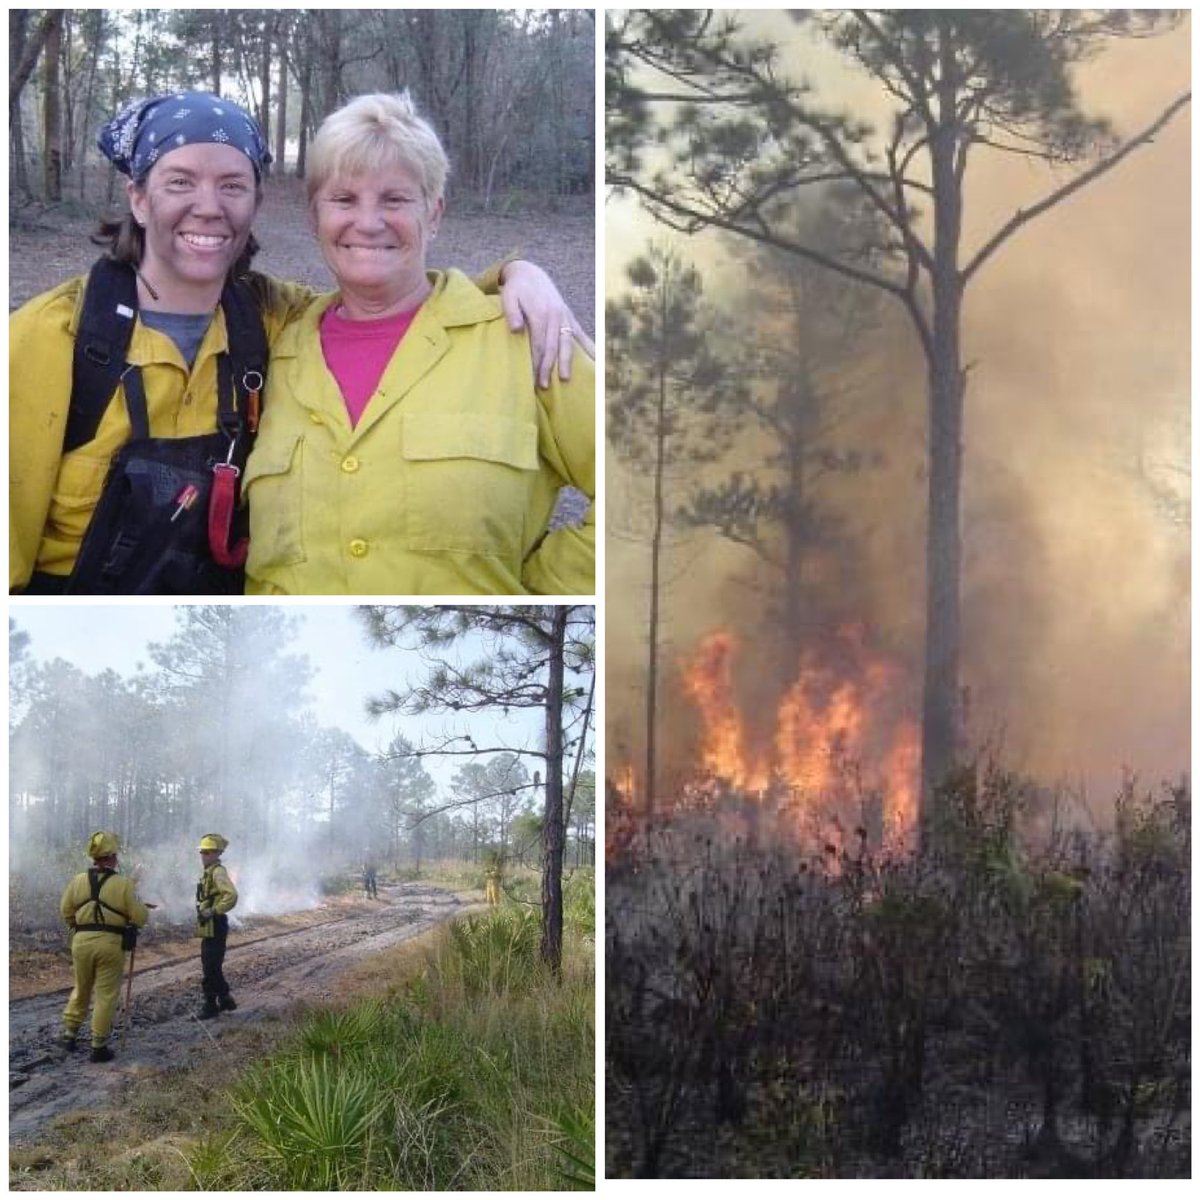 Happy #NationalWildlandFirefighterDay to my friends & colleagues who work hard to manage our natural areas & respond to #wildfire emergencies. 
🔥🌳
#wildlandfirefighter #wildfires #prescribedfire #prescribedburn #florida #floridaparks #floridaparkservice #conservation #habitat